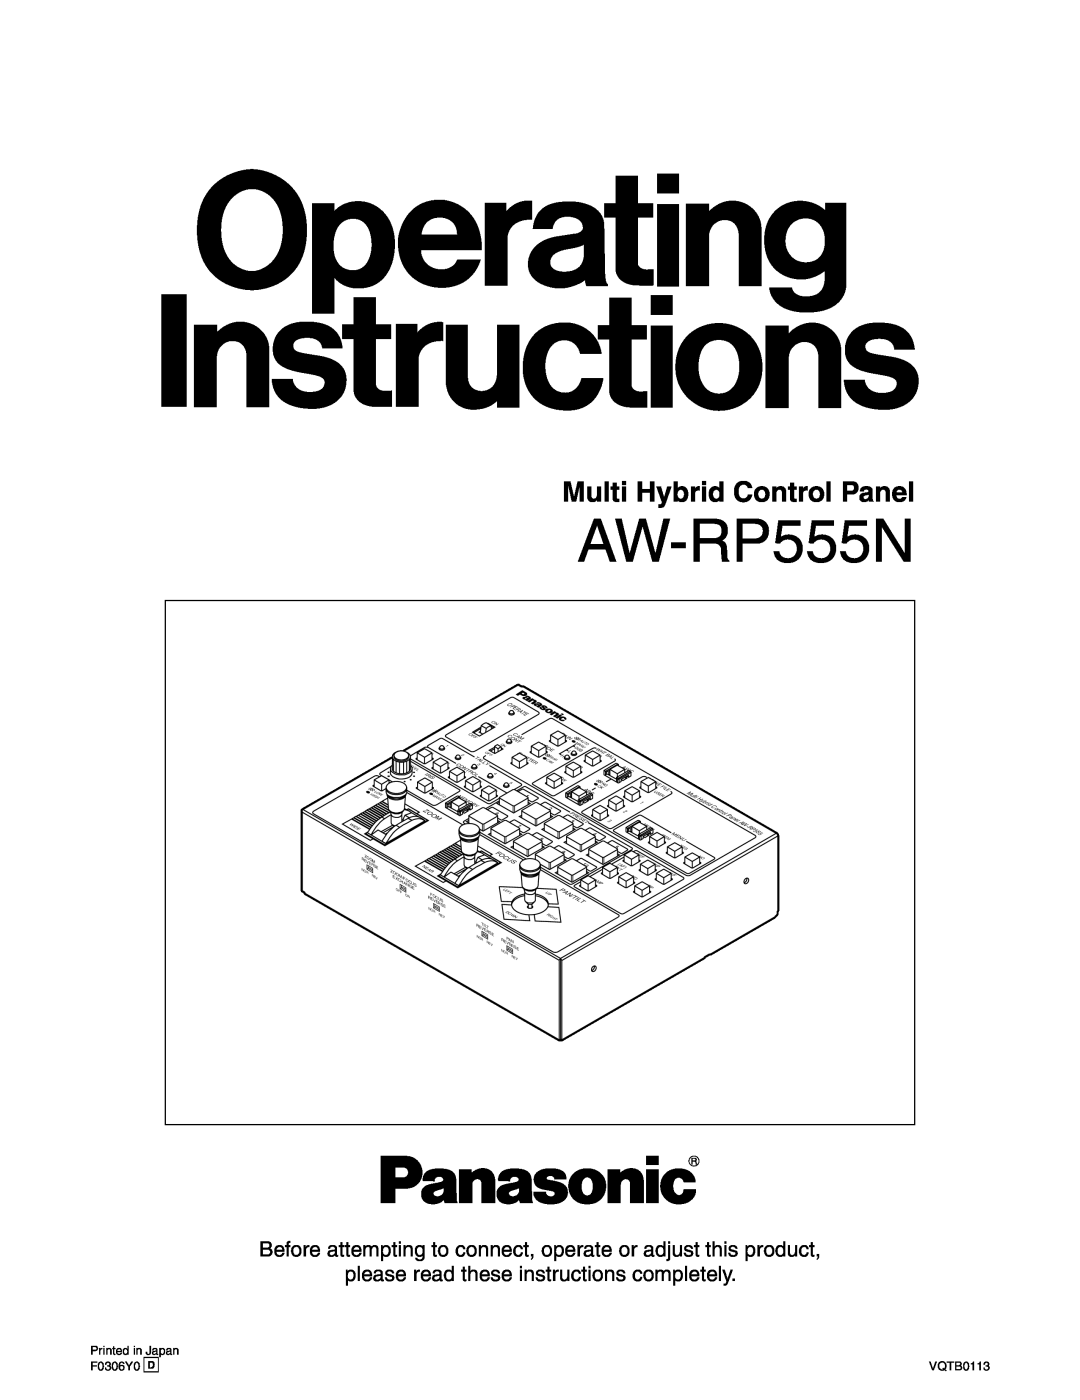 Panasonic AW-RP555N manual Multi Hybrid Control Panel, please read these instructions completely, F0306Y0 D, VQTB0113 